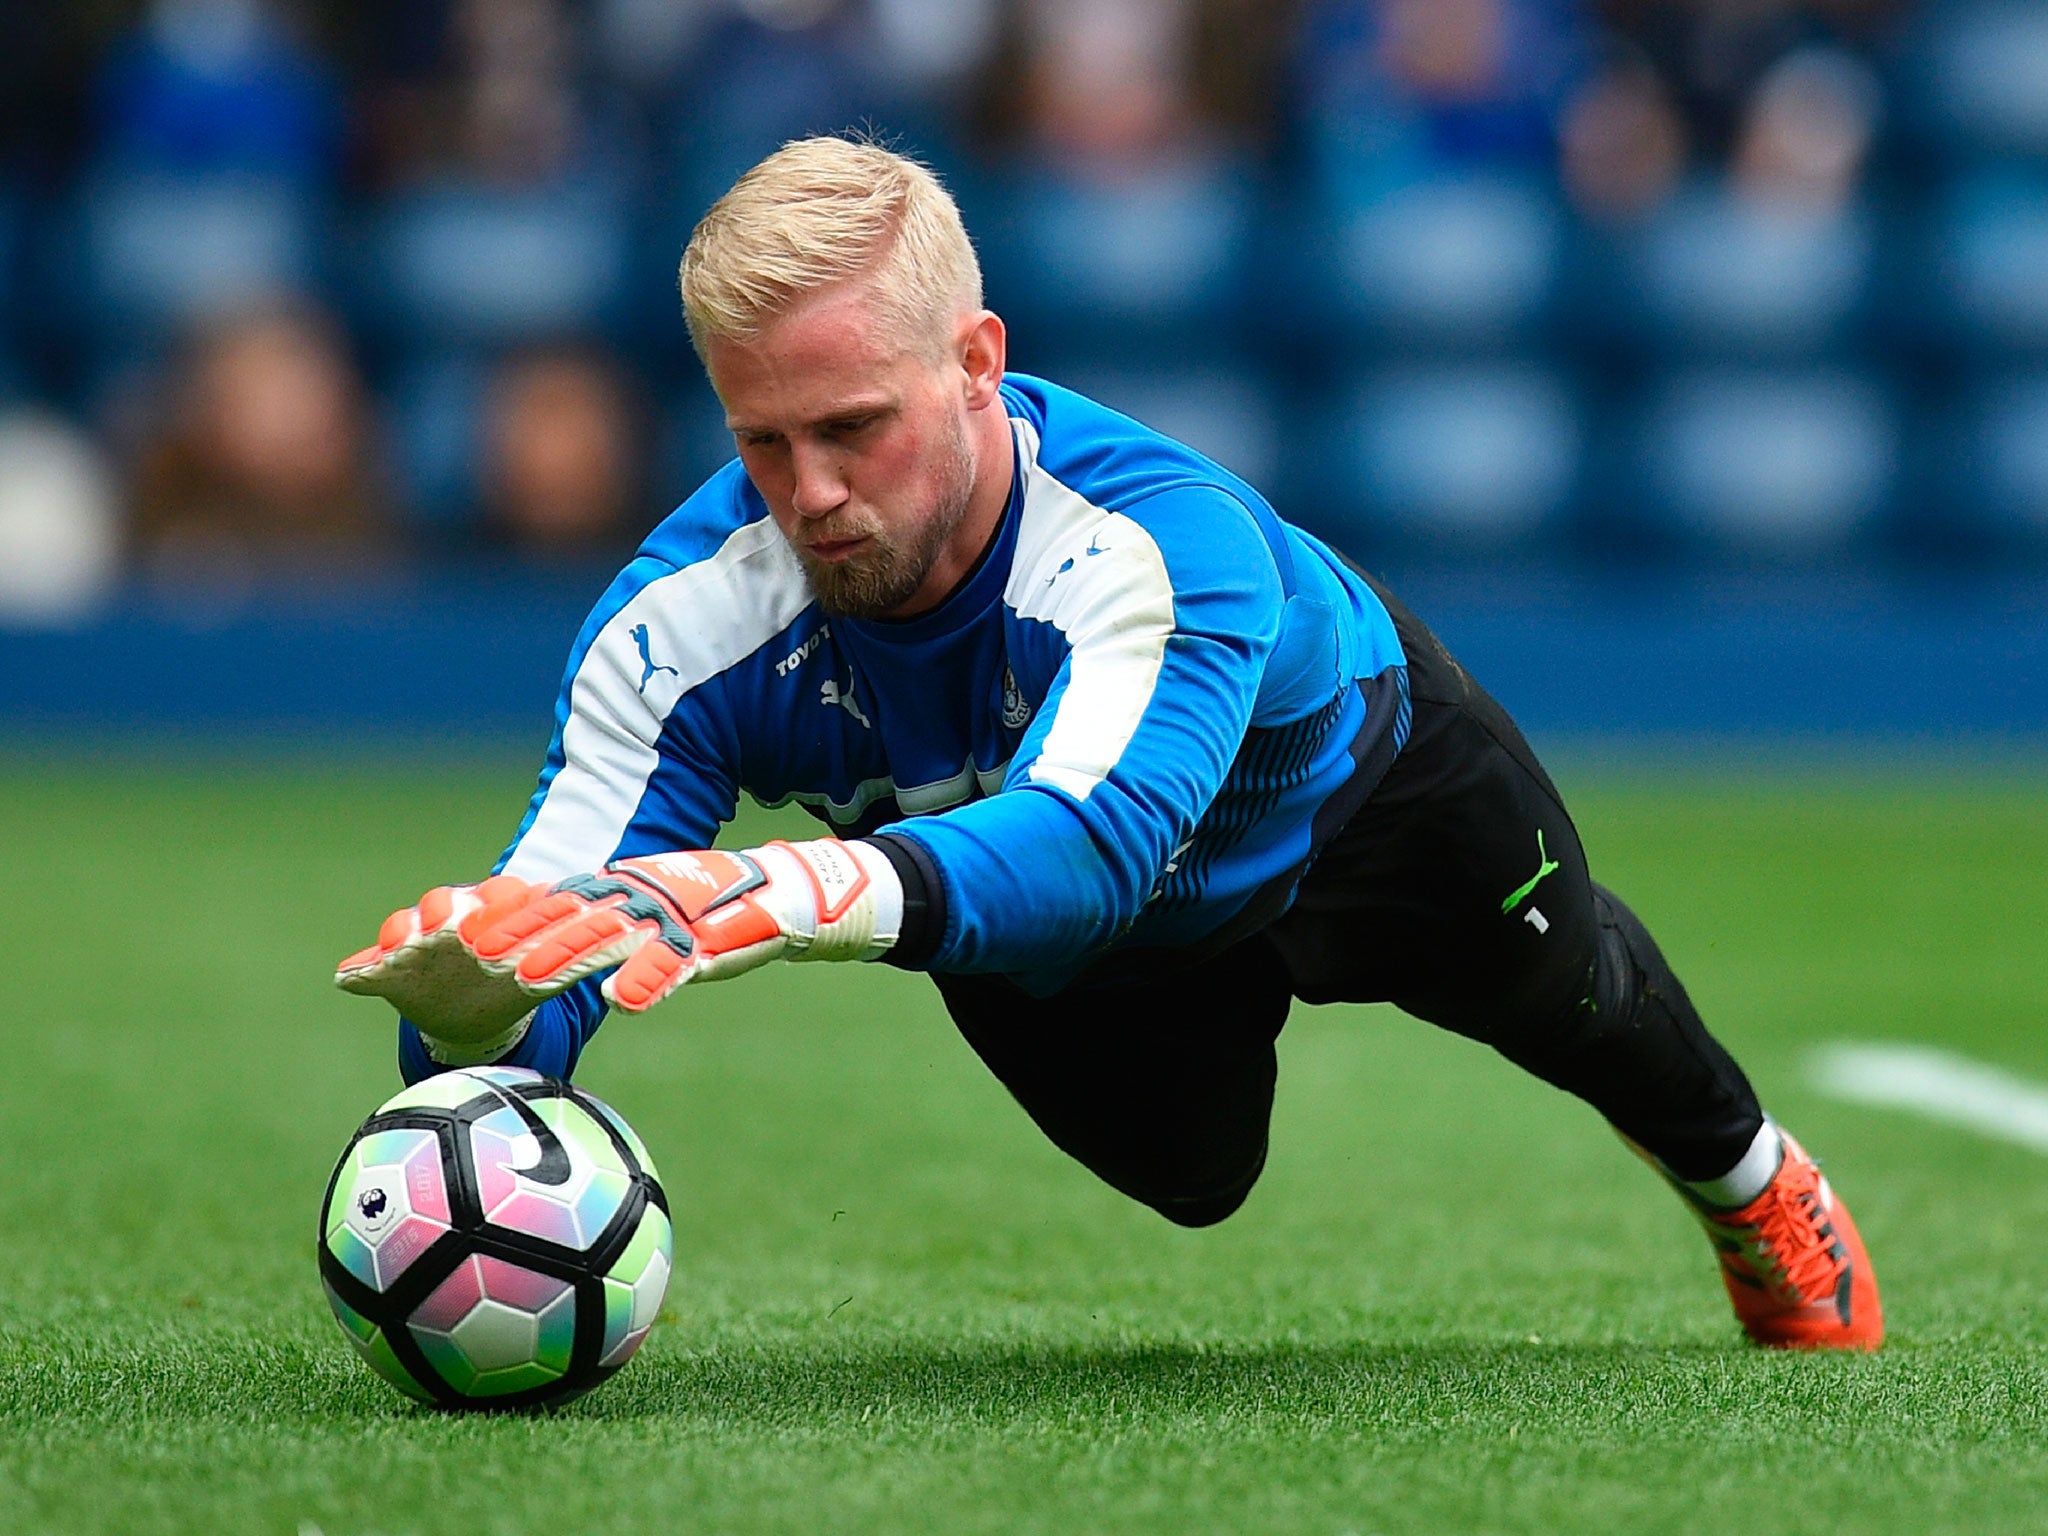 Schmeichel believes the Leicester players let down Claudio Ranieri